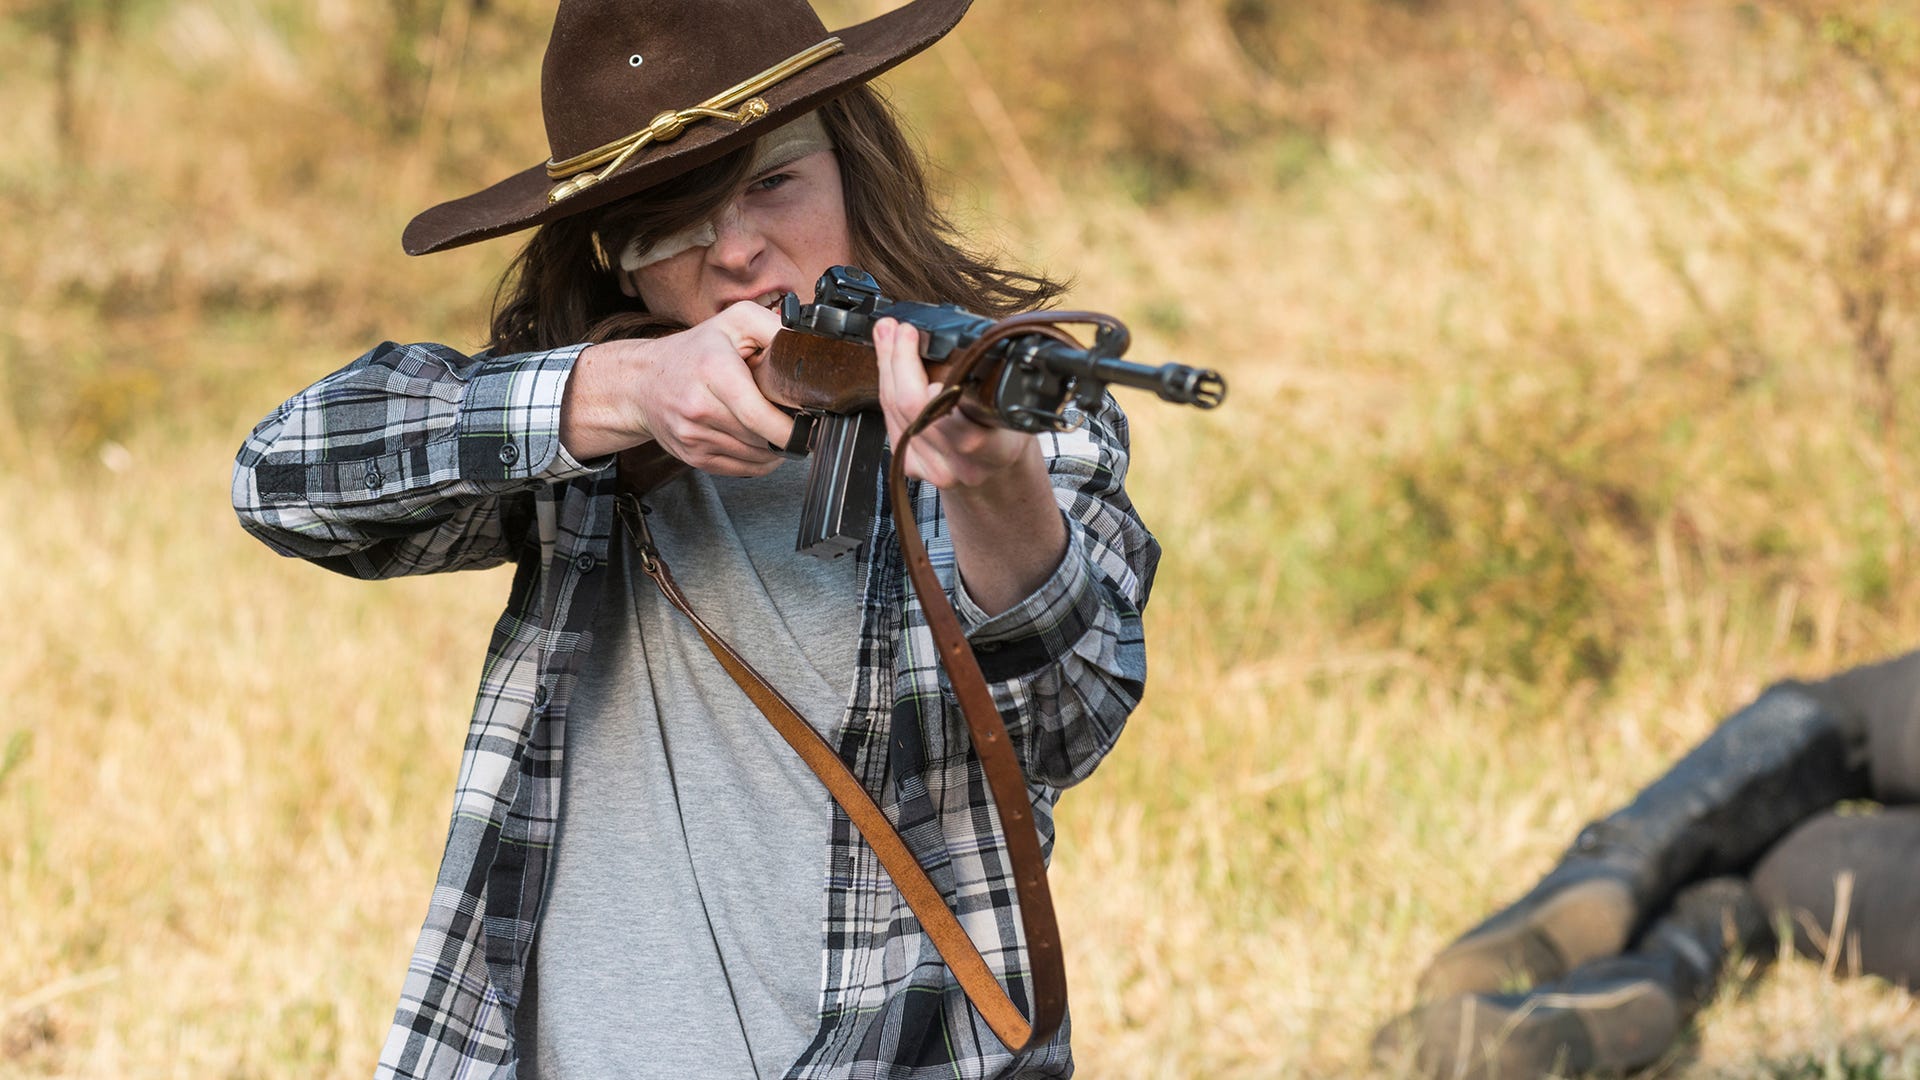 Chandler Riggs, The Walking Dead